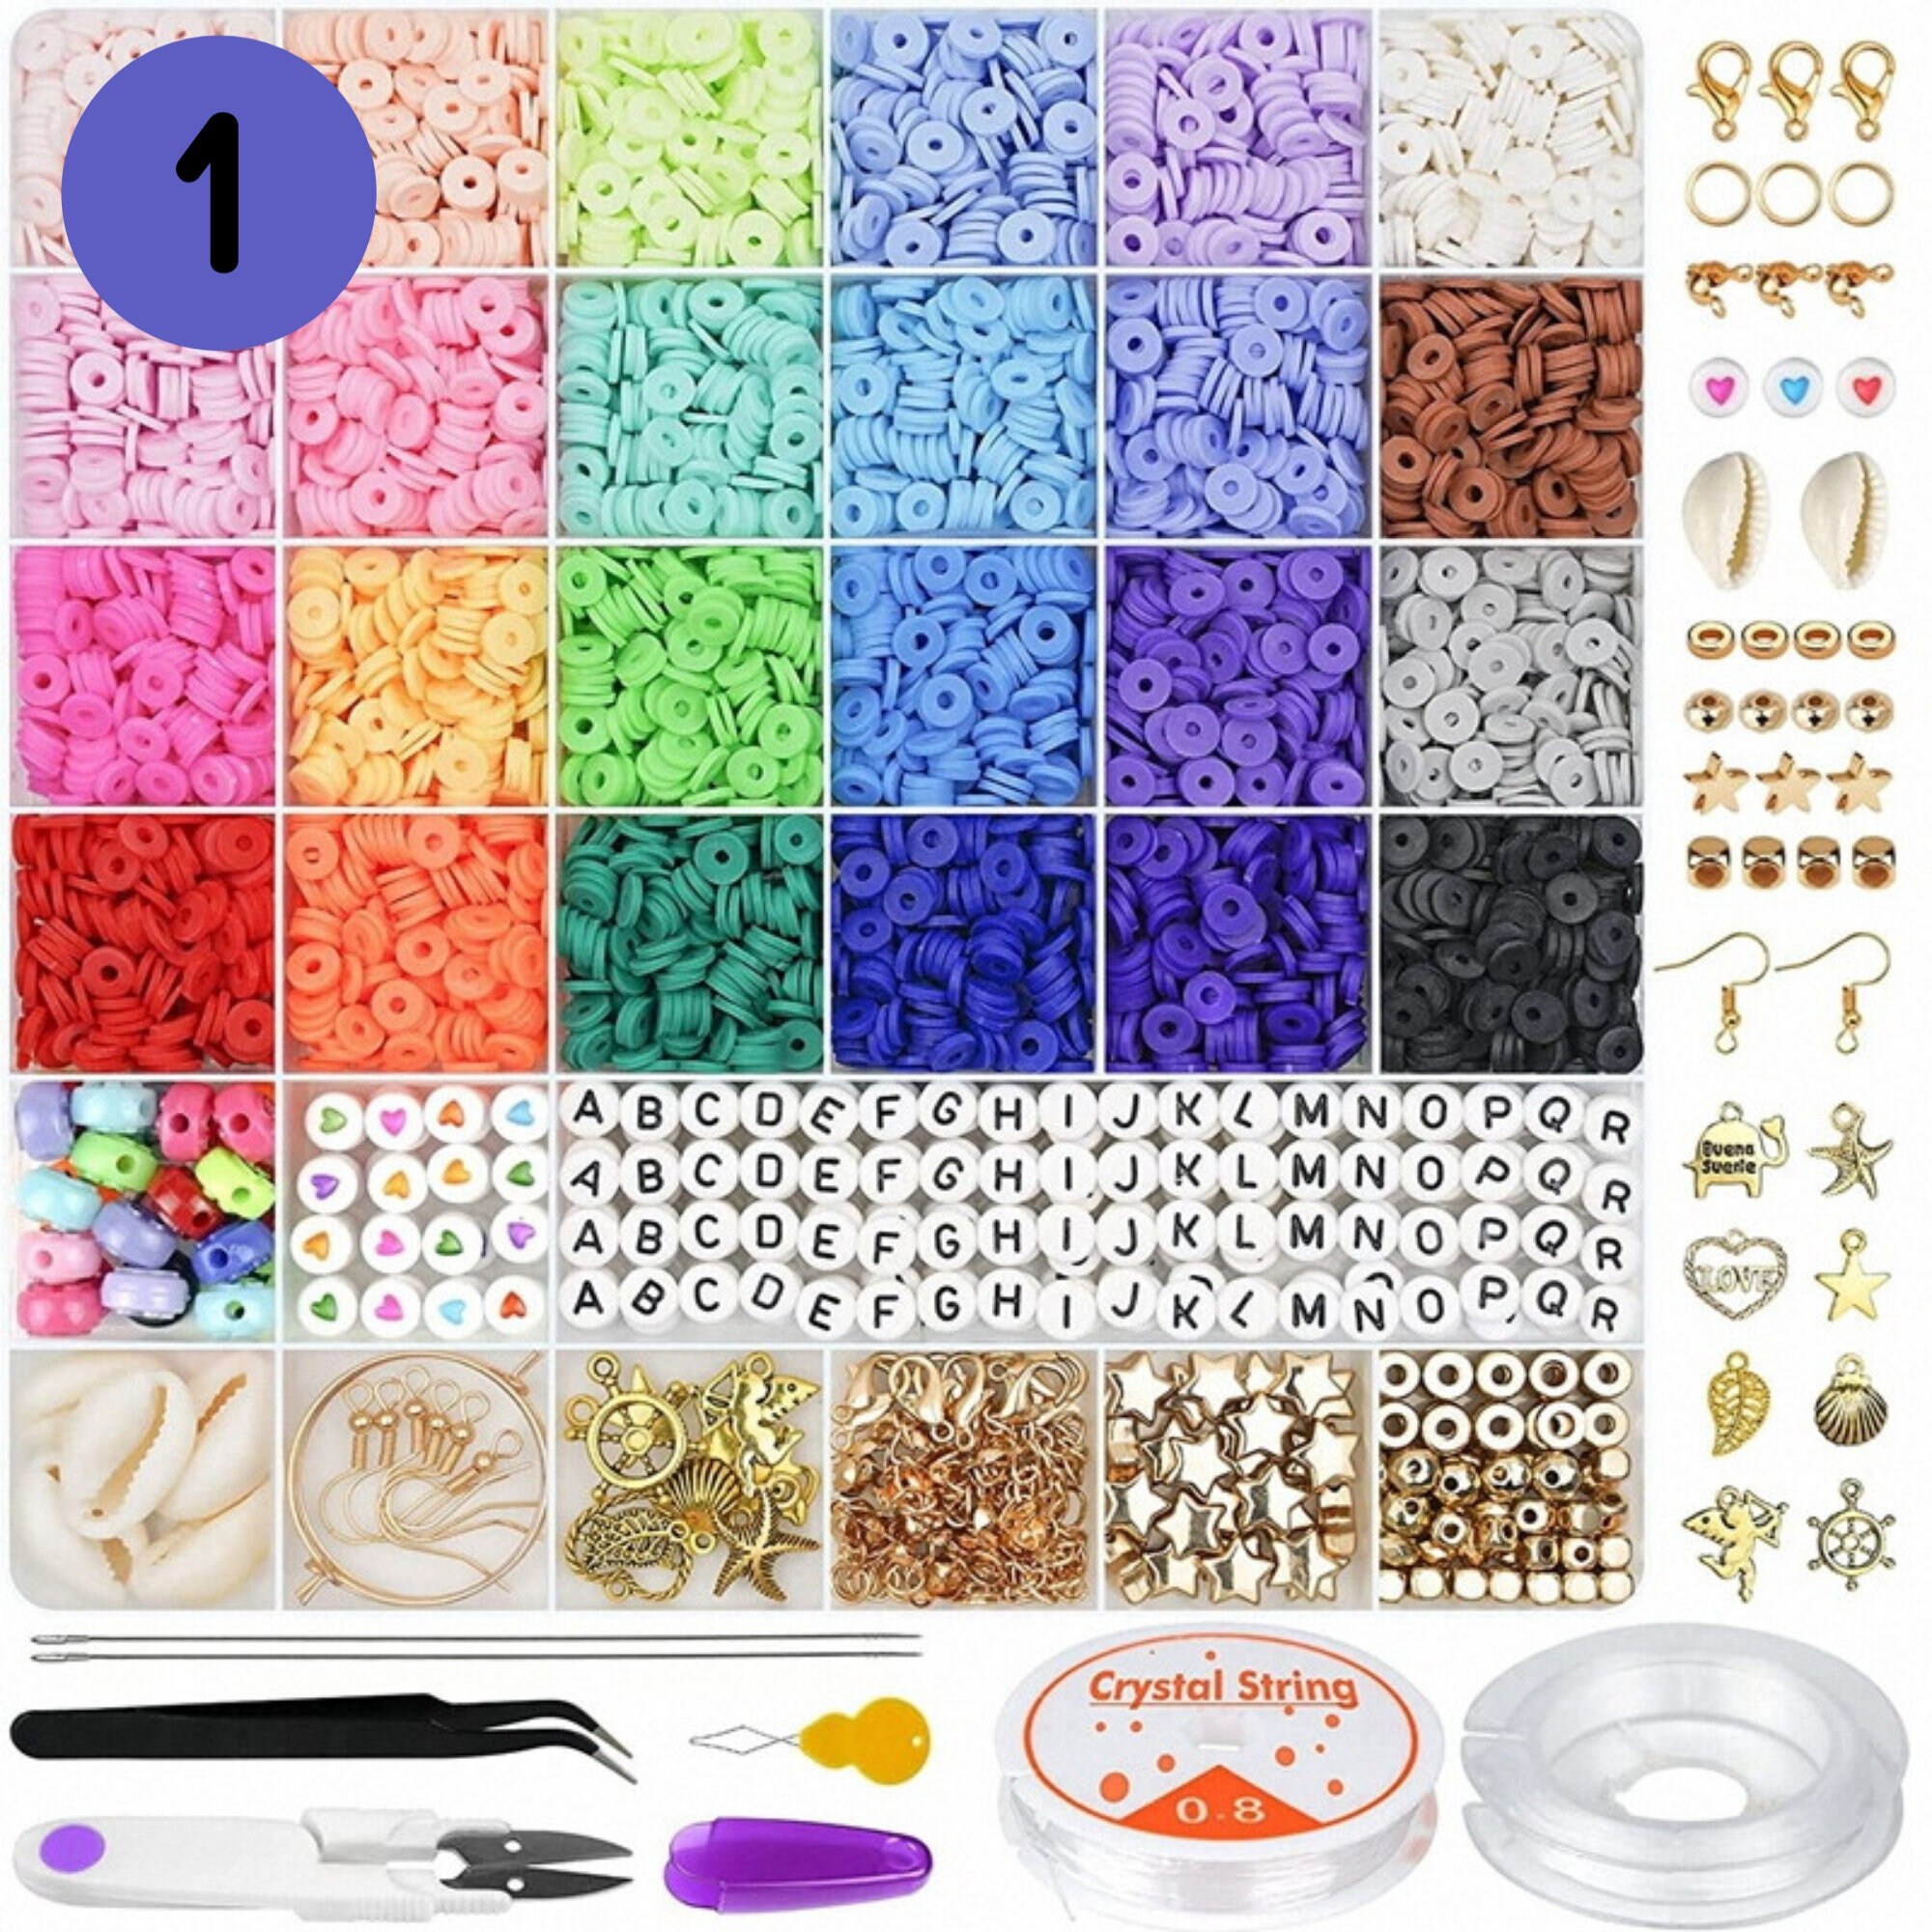 Redtwo 4200 Pcs Clay Beads Bracelet Making Kit, Friendship Preppy Flat  Polymer Heishi Beads Jewelry Kits with Charms, Gifts for Teen Girls Crafts  for